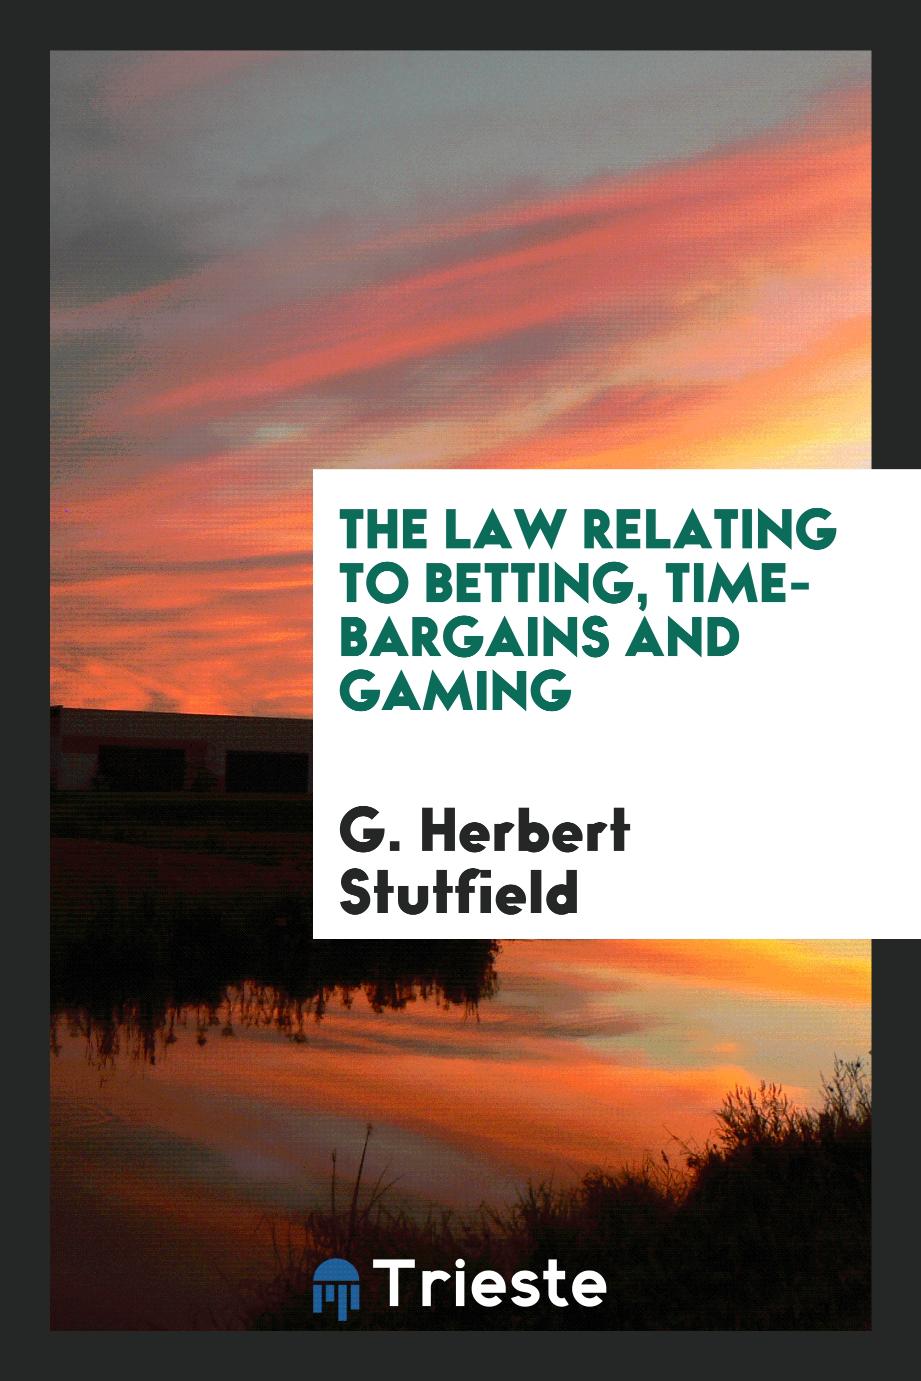 The Law Relating to Betting, Time-Bargains and Gaming